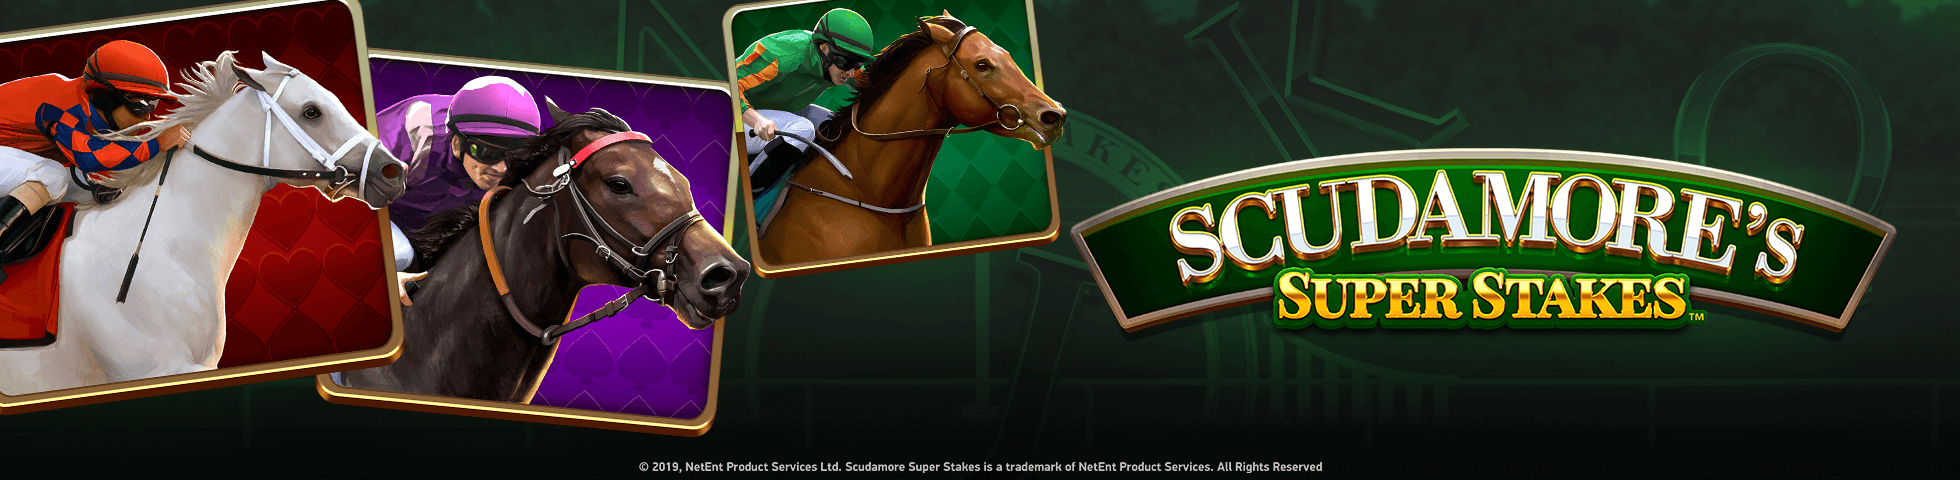 Scudamore's Super Stakes banner